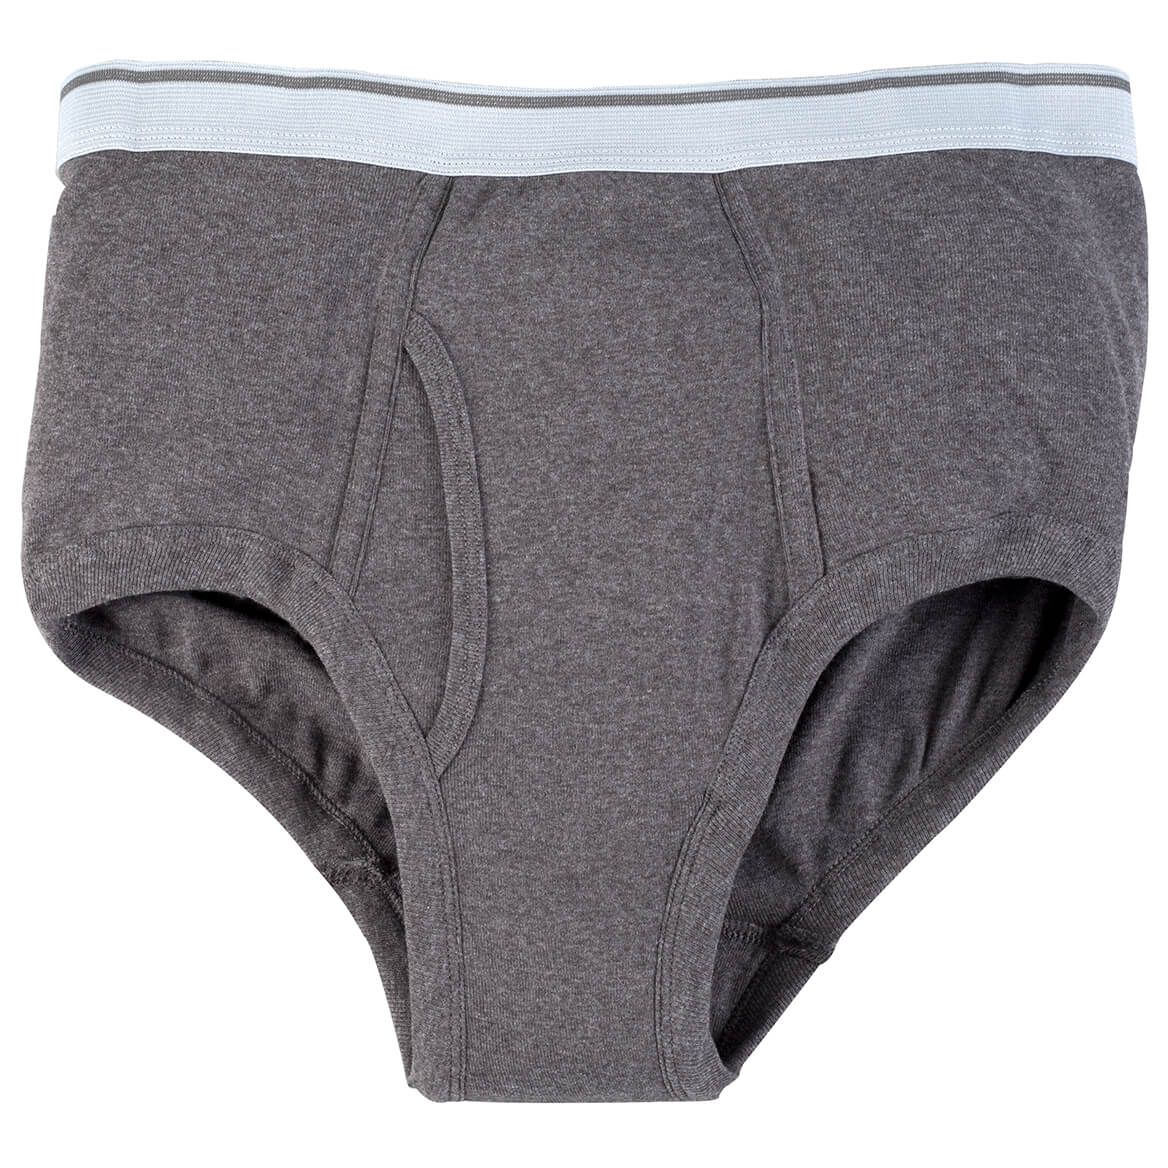 Men's 20 oz. Incontinence Briefs – Set of 3 Multi - Easy Comforts